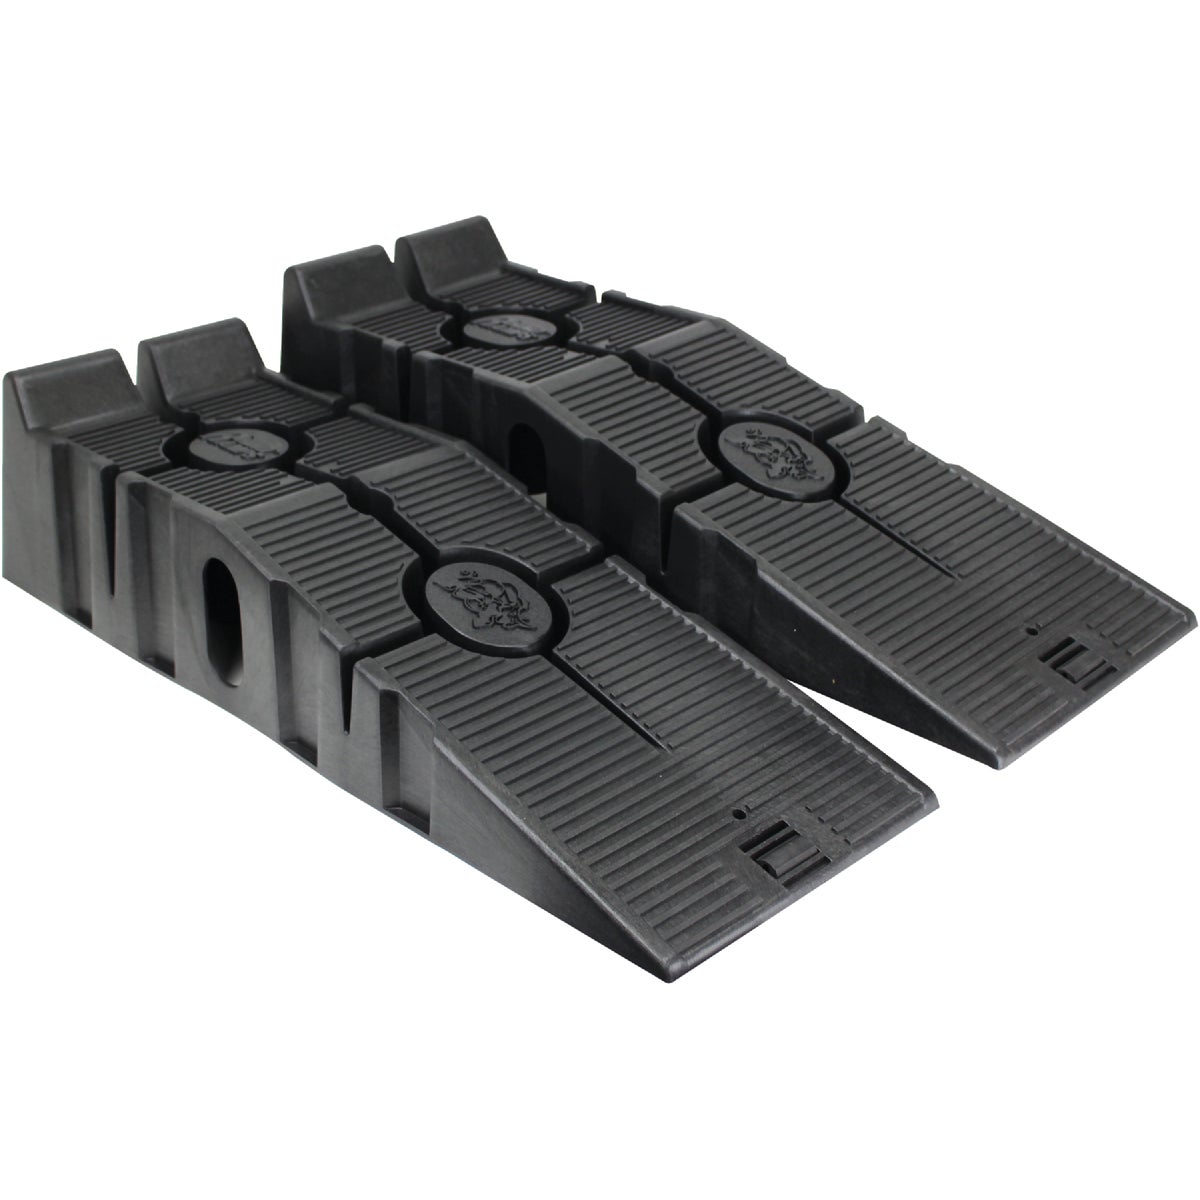 Item 572241, Rhino Ramps are made of durable plastic with a 17 deg.